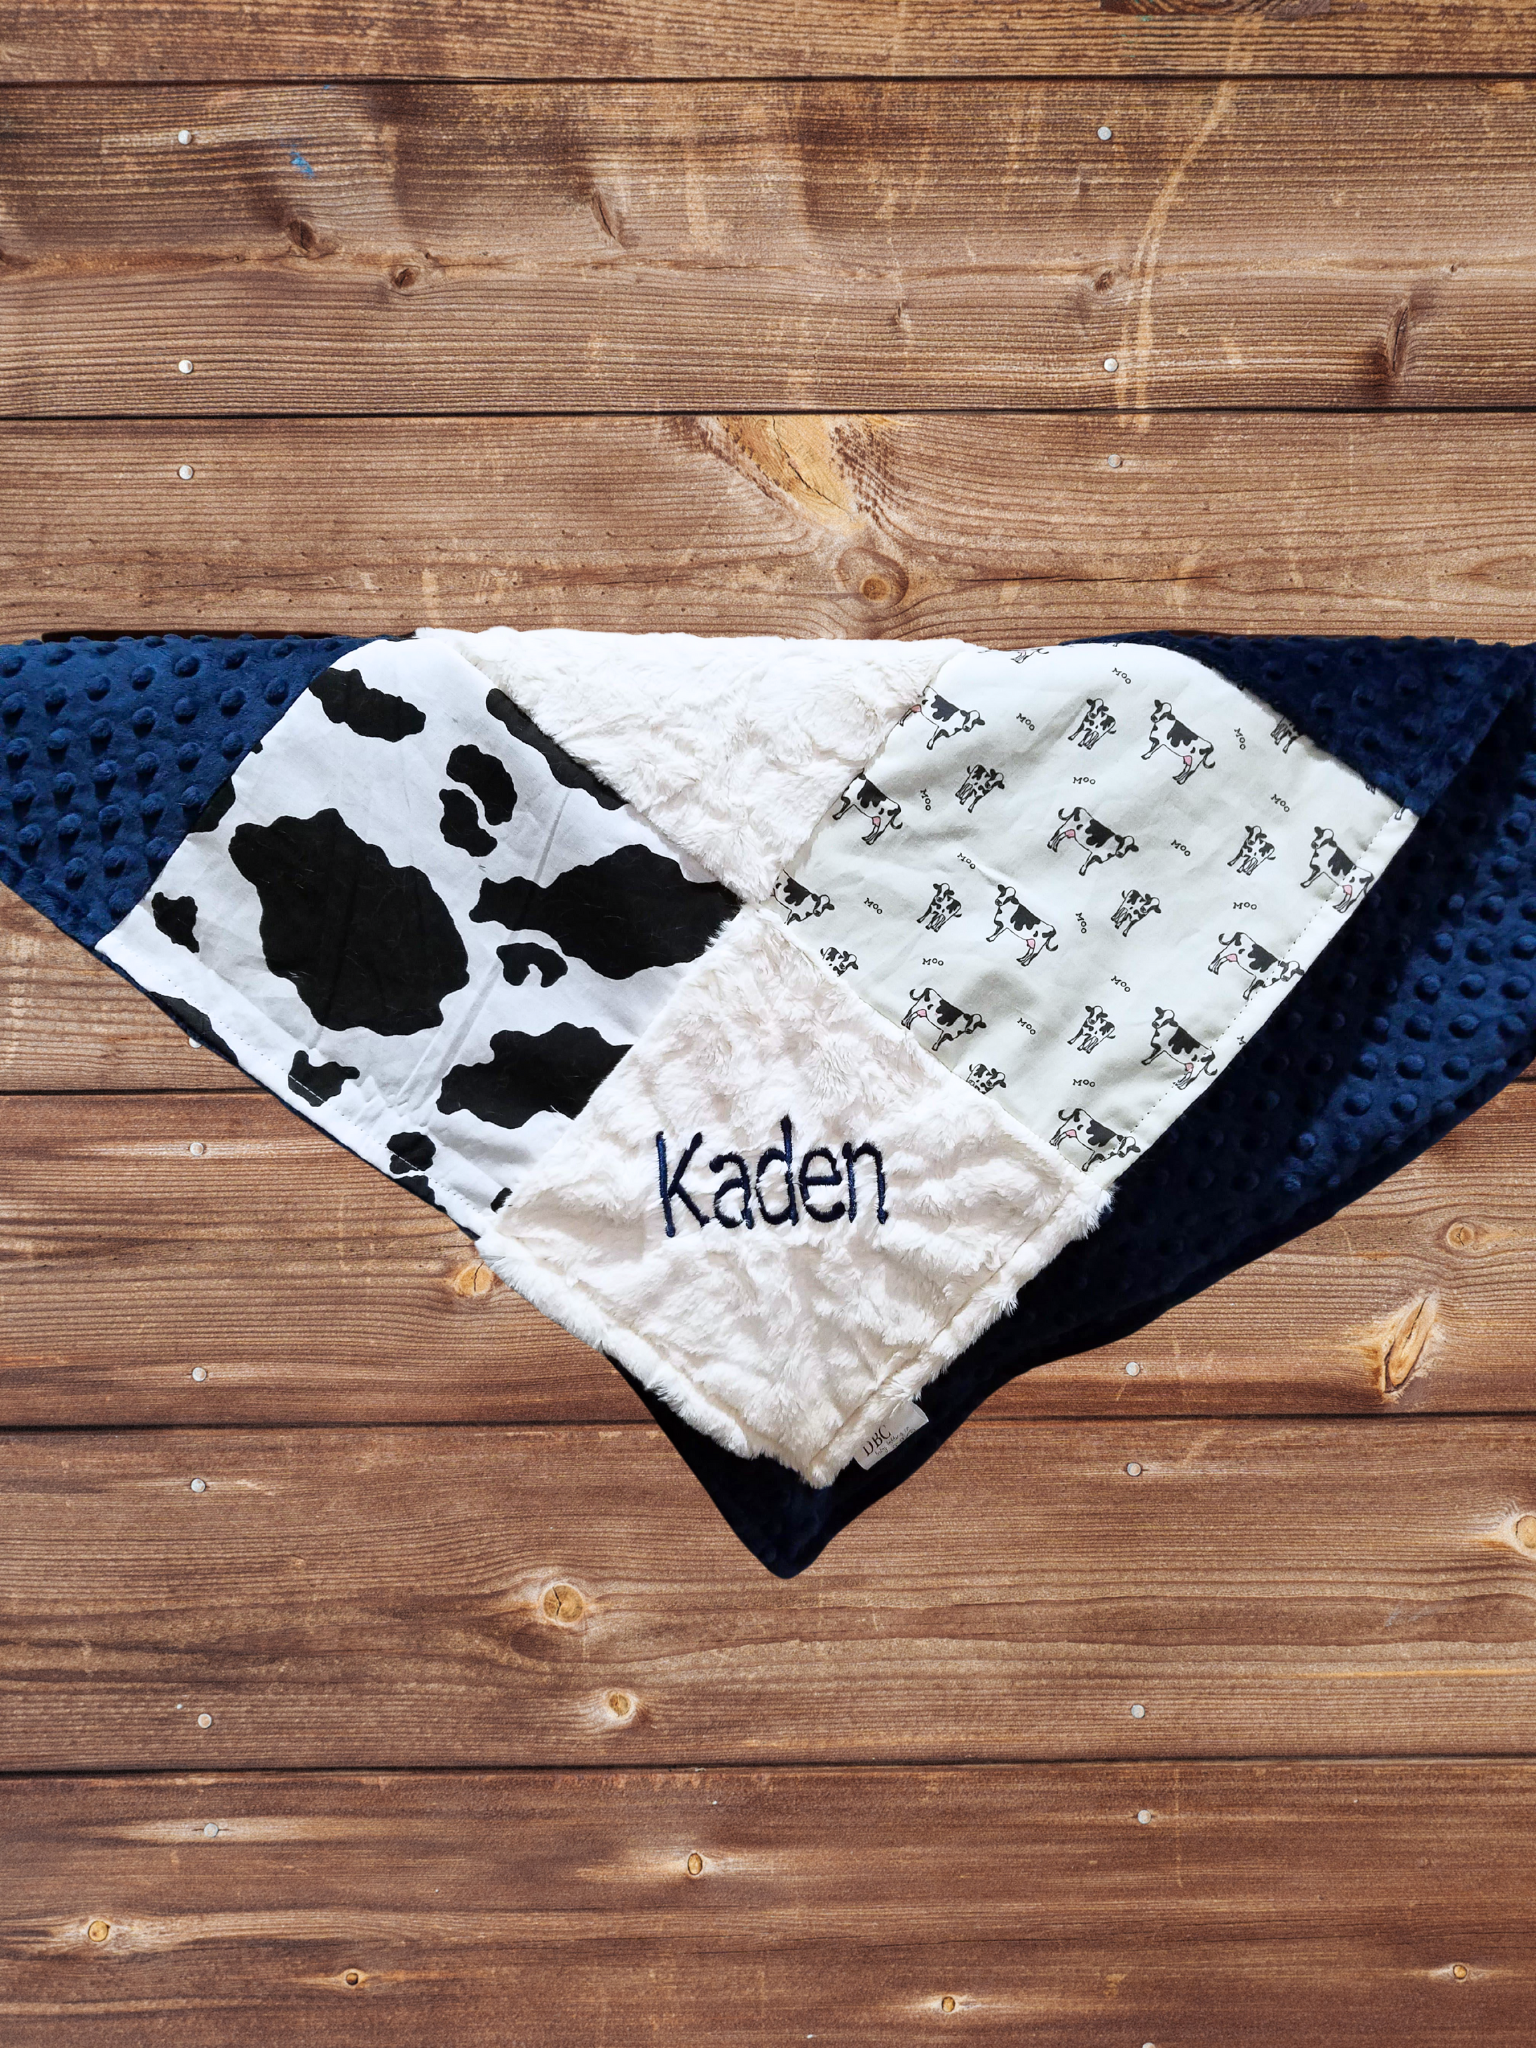 Patchwork Blanket - Cows and Black White Cow Print Farm Blanket - DBC Baby Bedding Co 